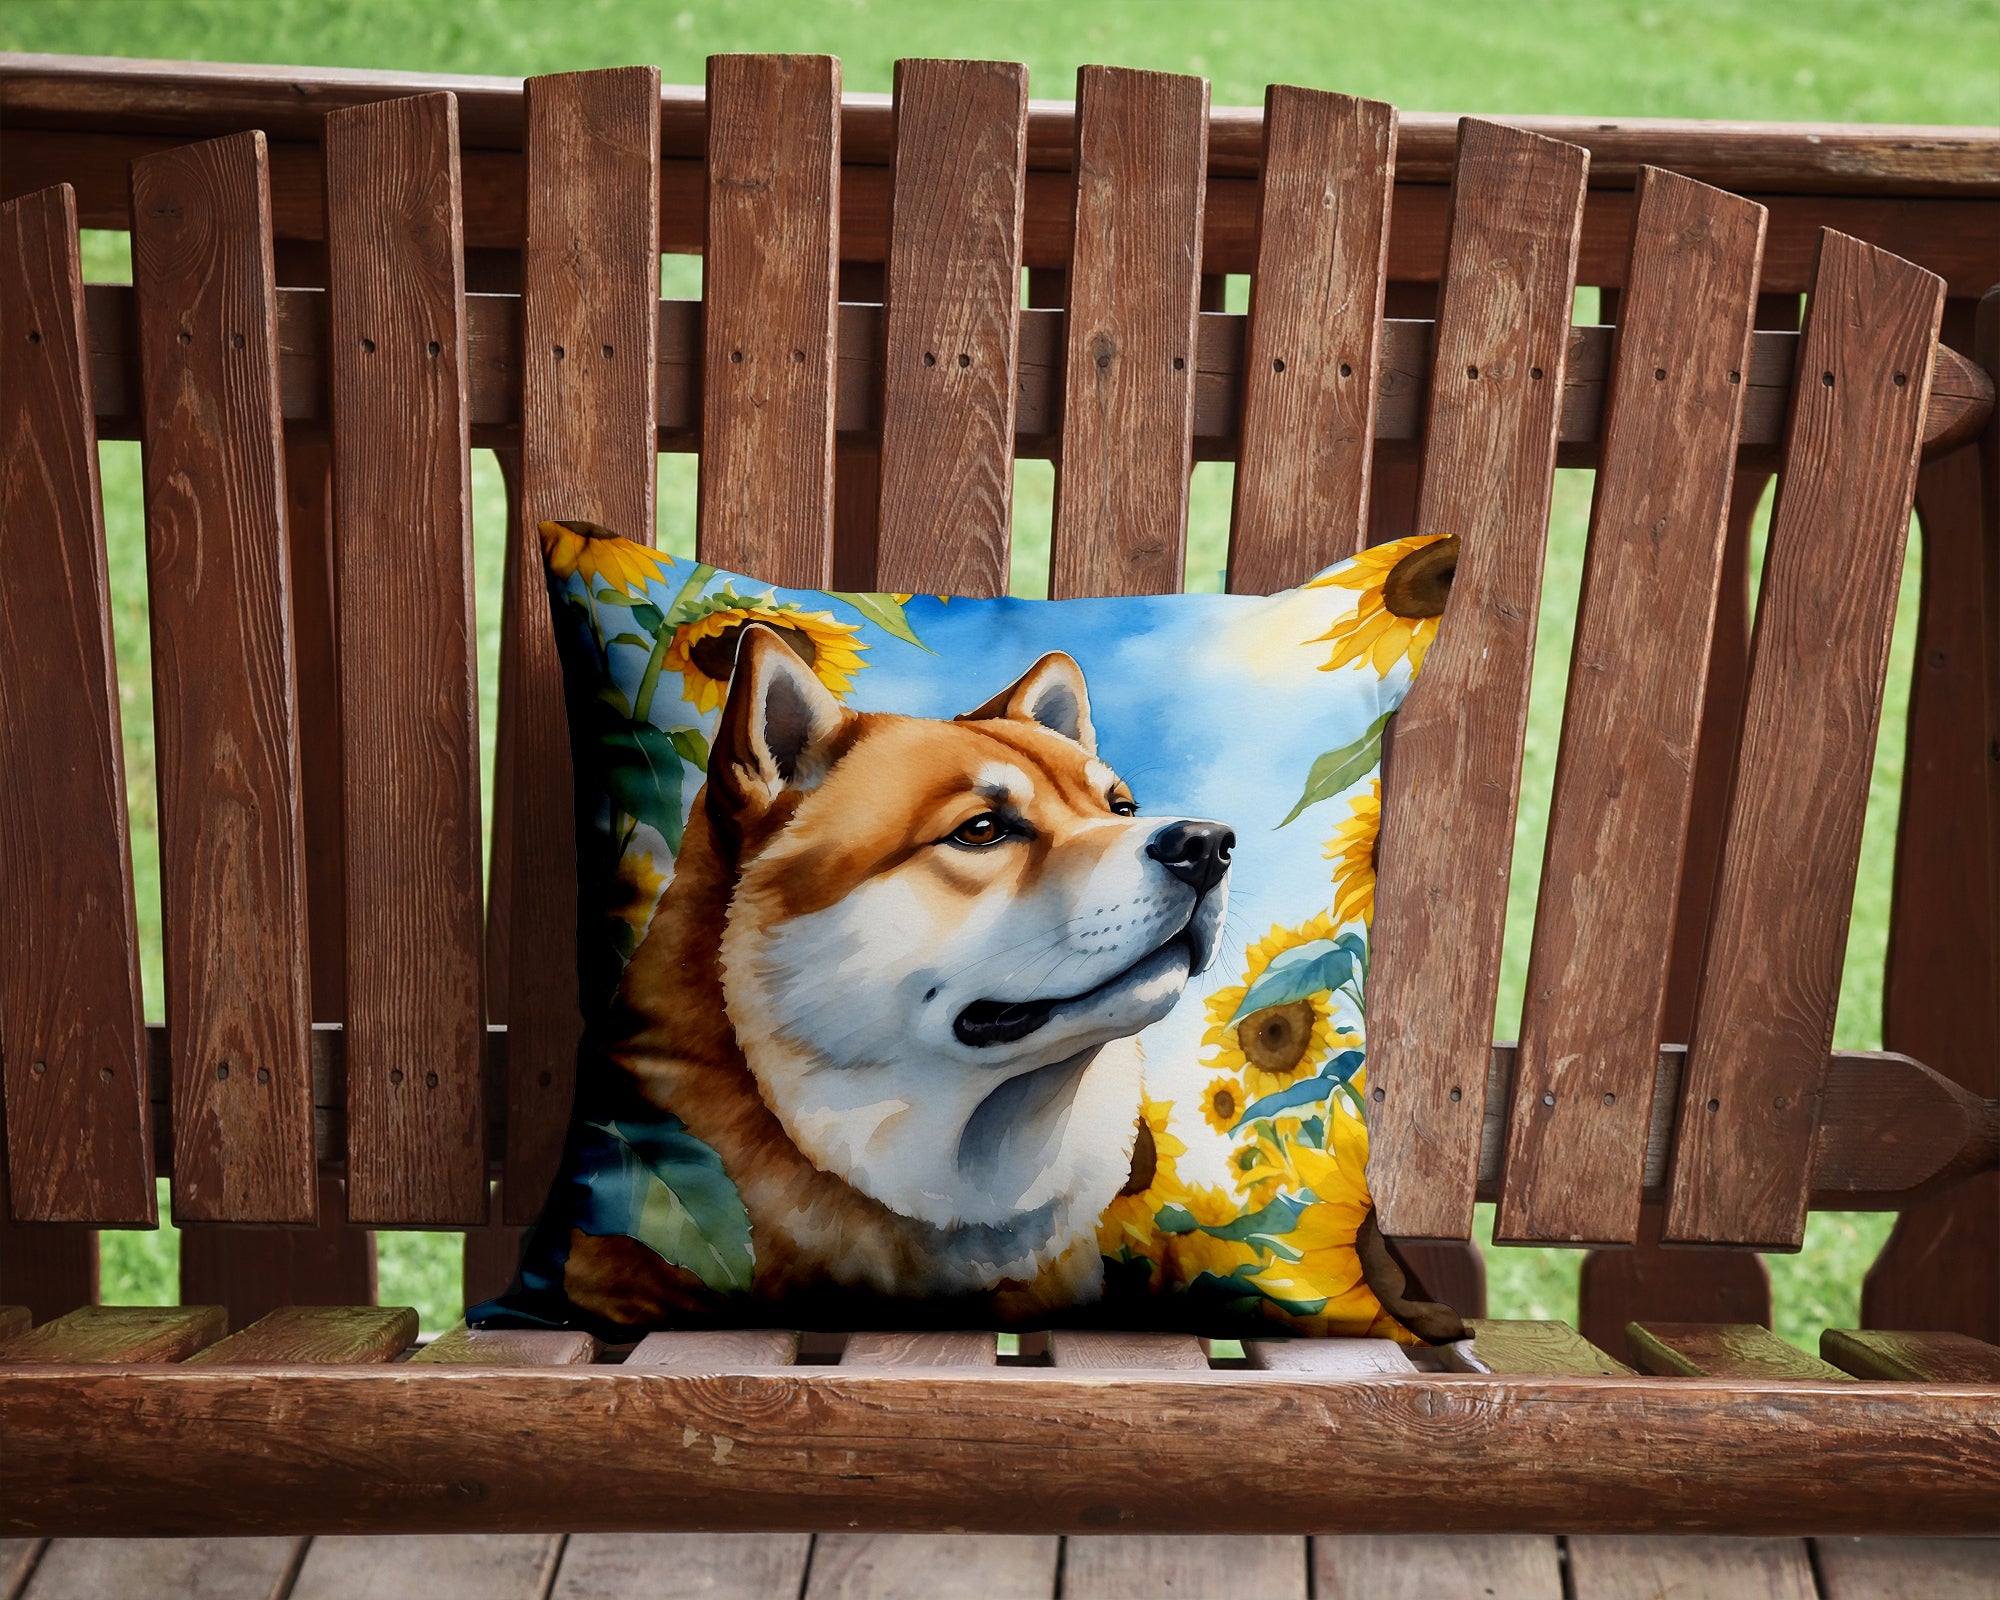 Buy this Akita in Sunflowers Throw Pillow